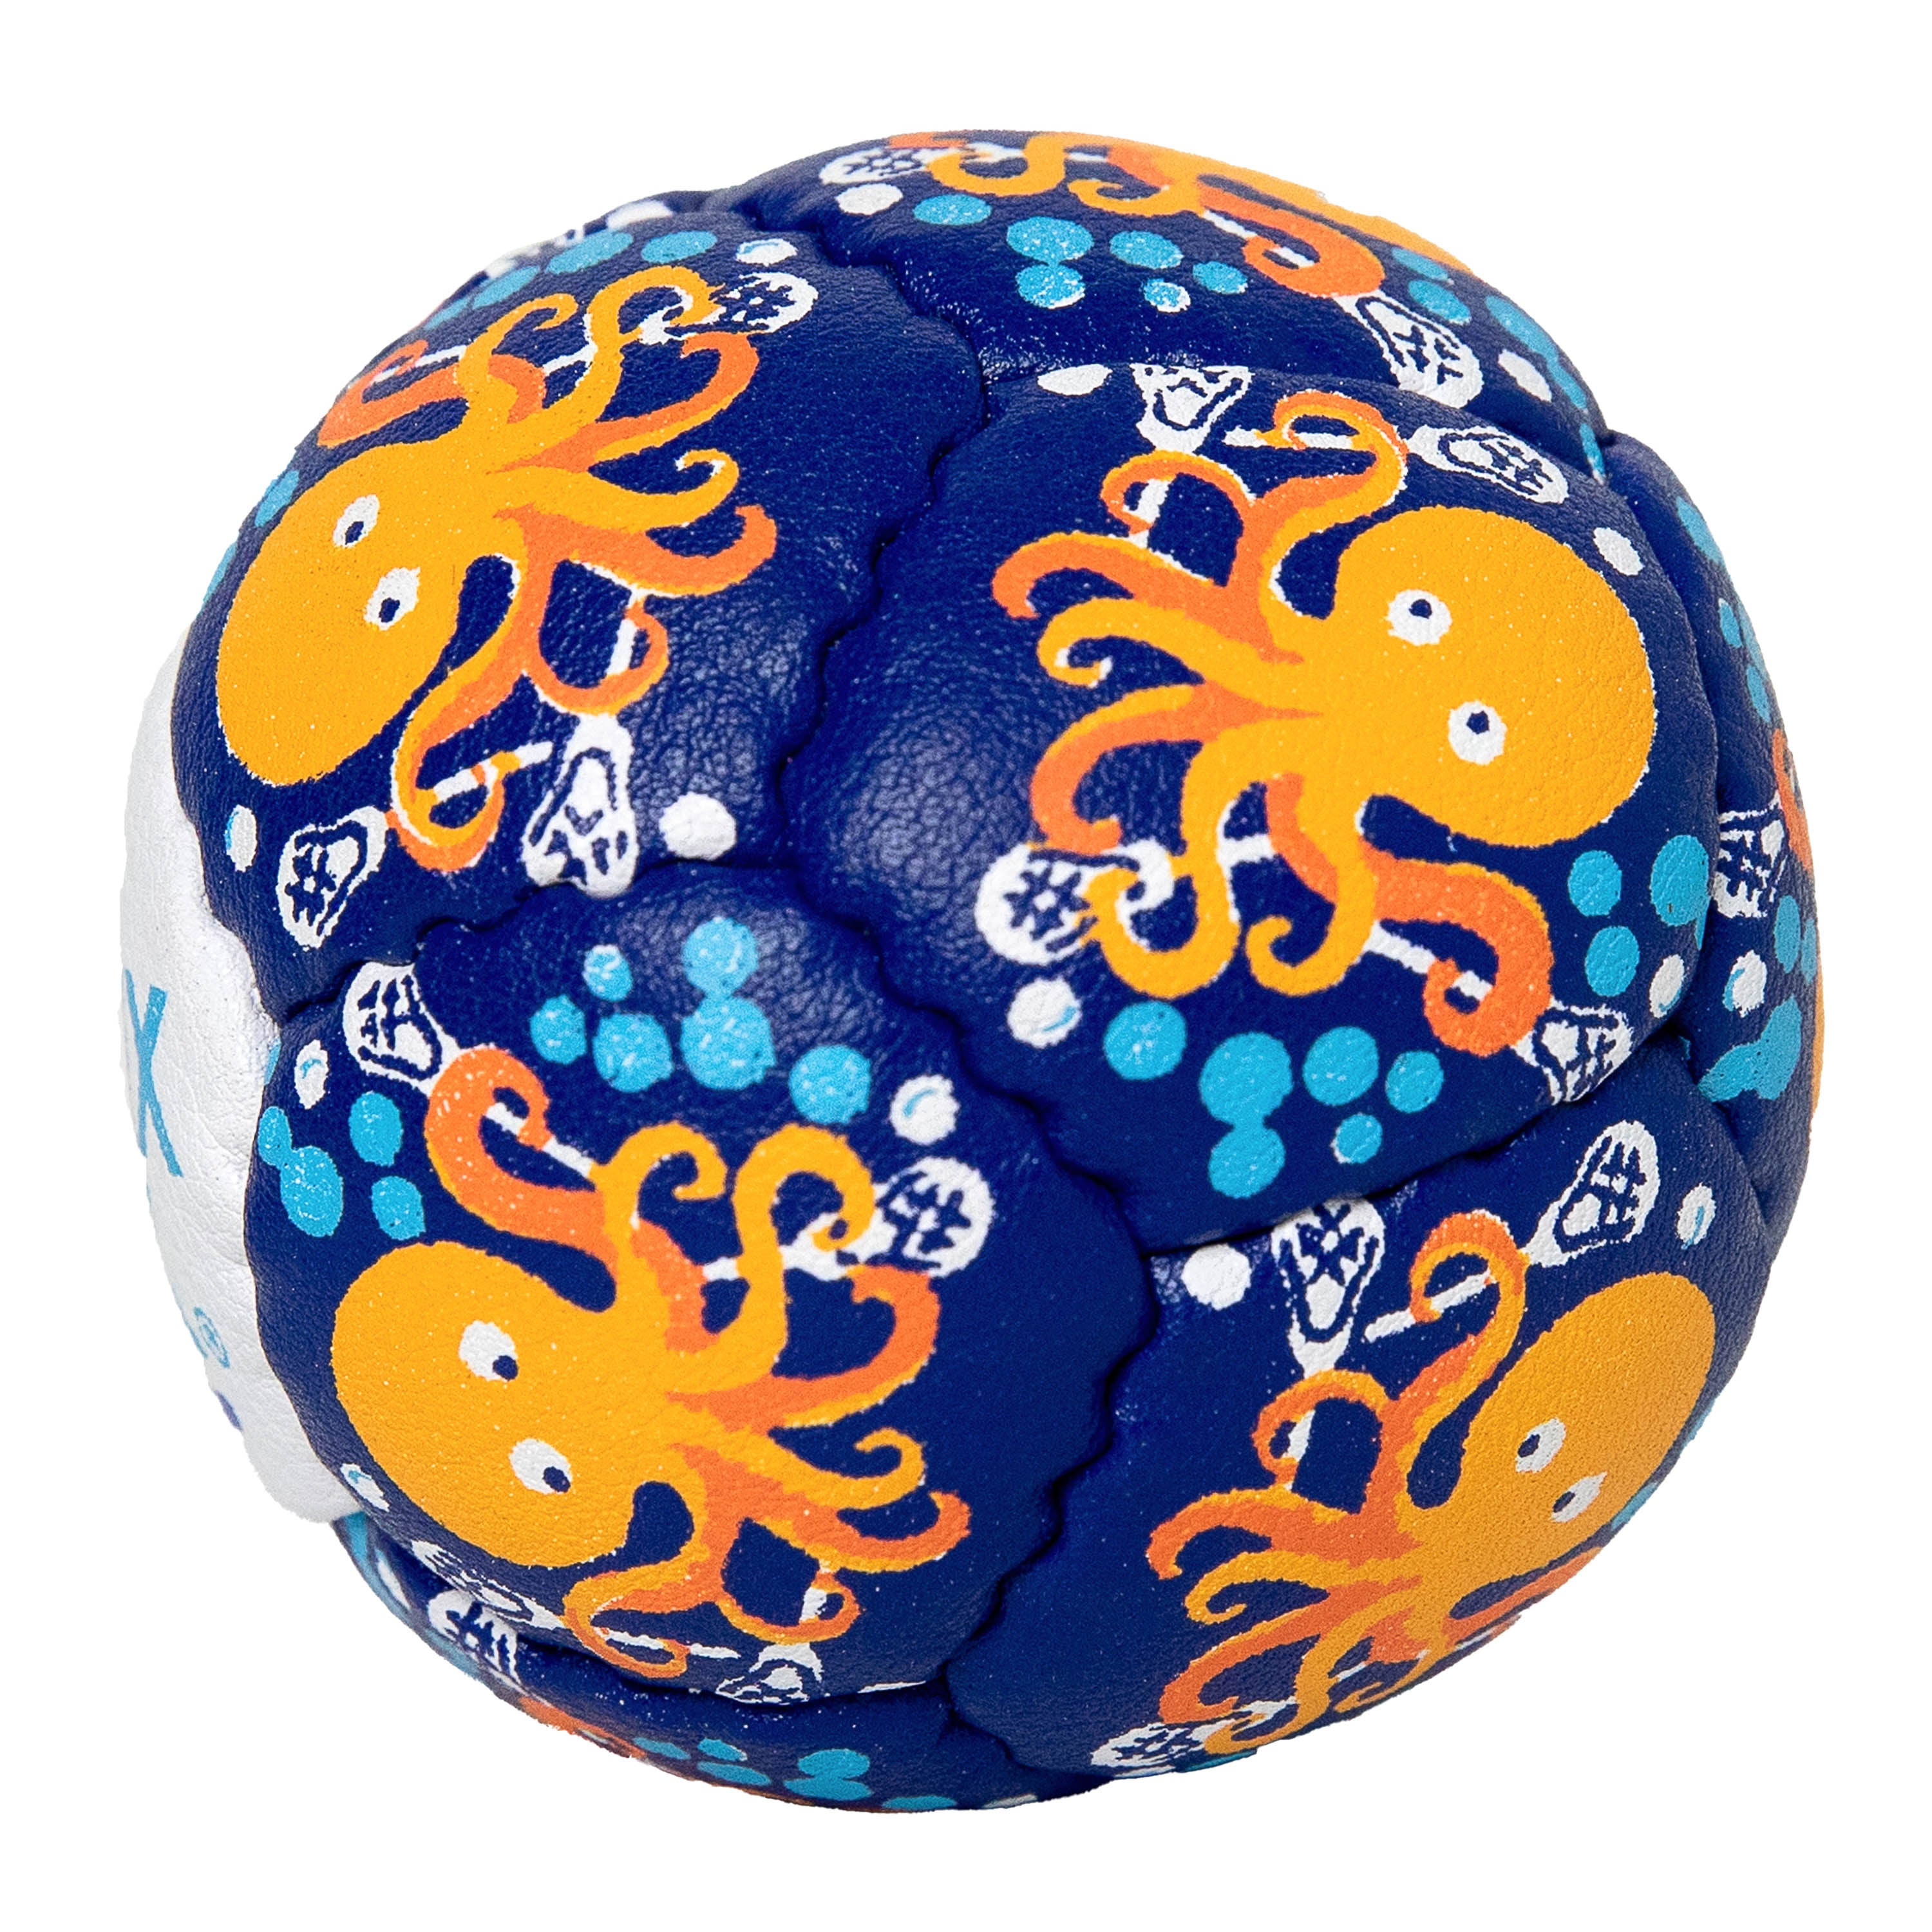 Octopus Swax Lax Lacrosse Practice Ball Pattern Indoor and Outdoor Training - Side View